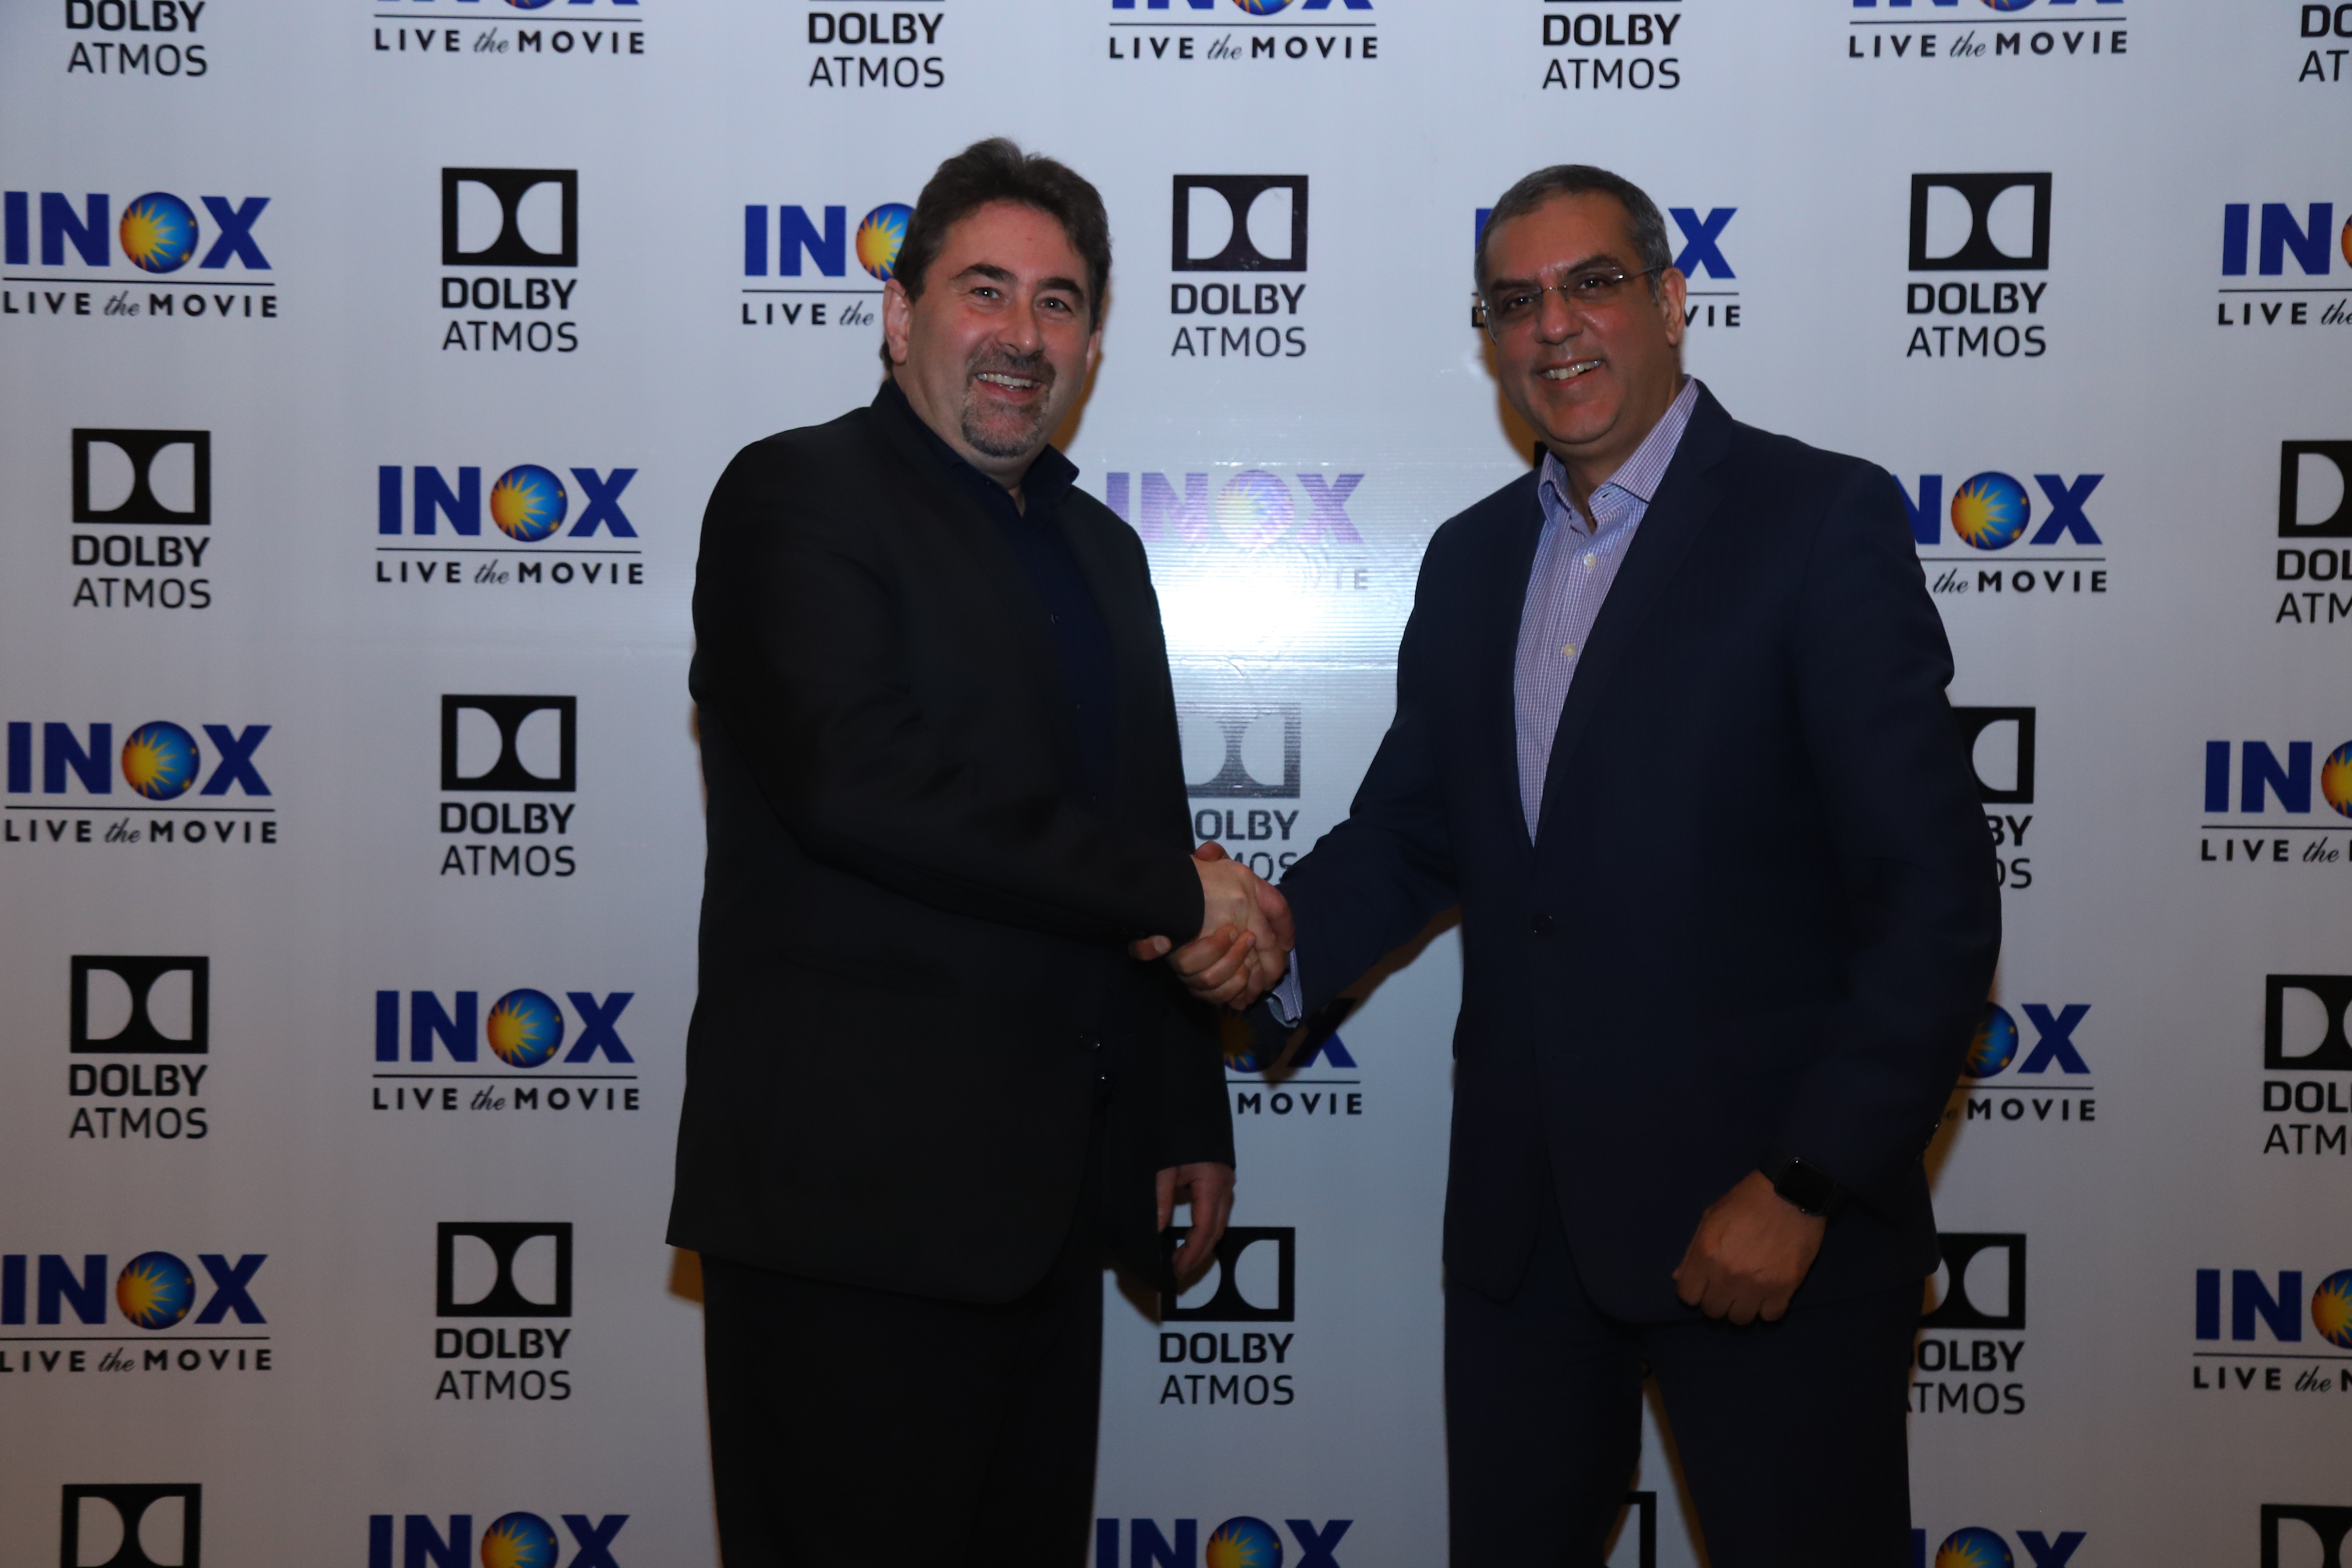 INOX to deploy dolby multichannel amplifiers